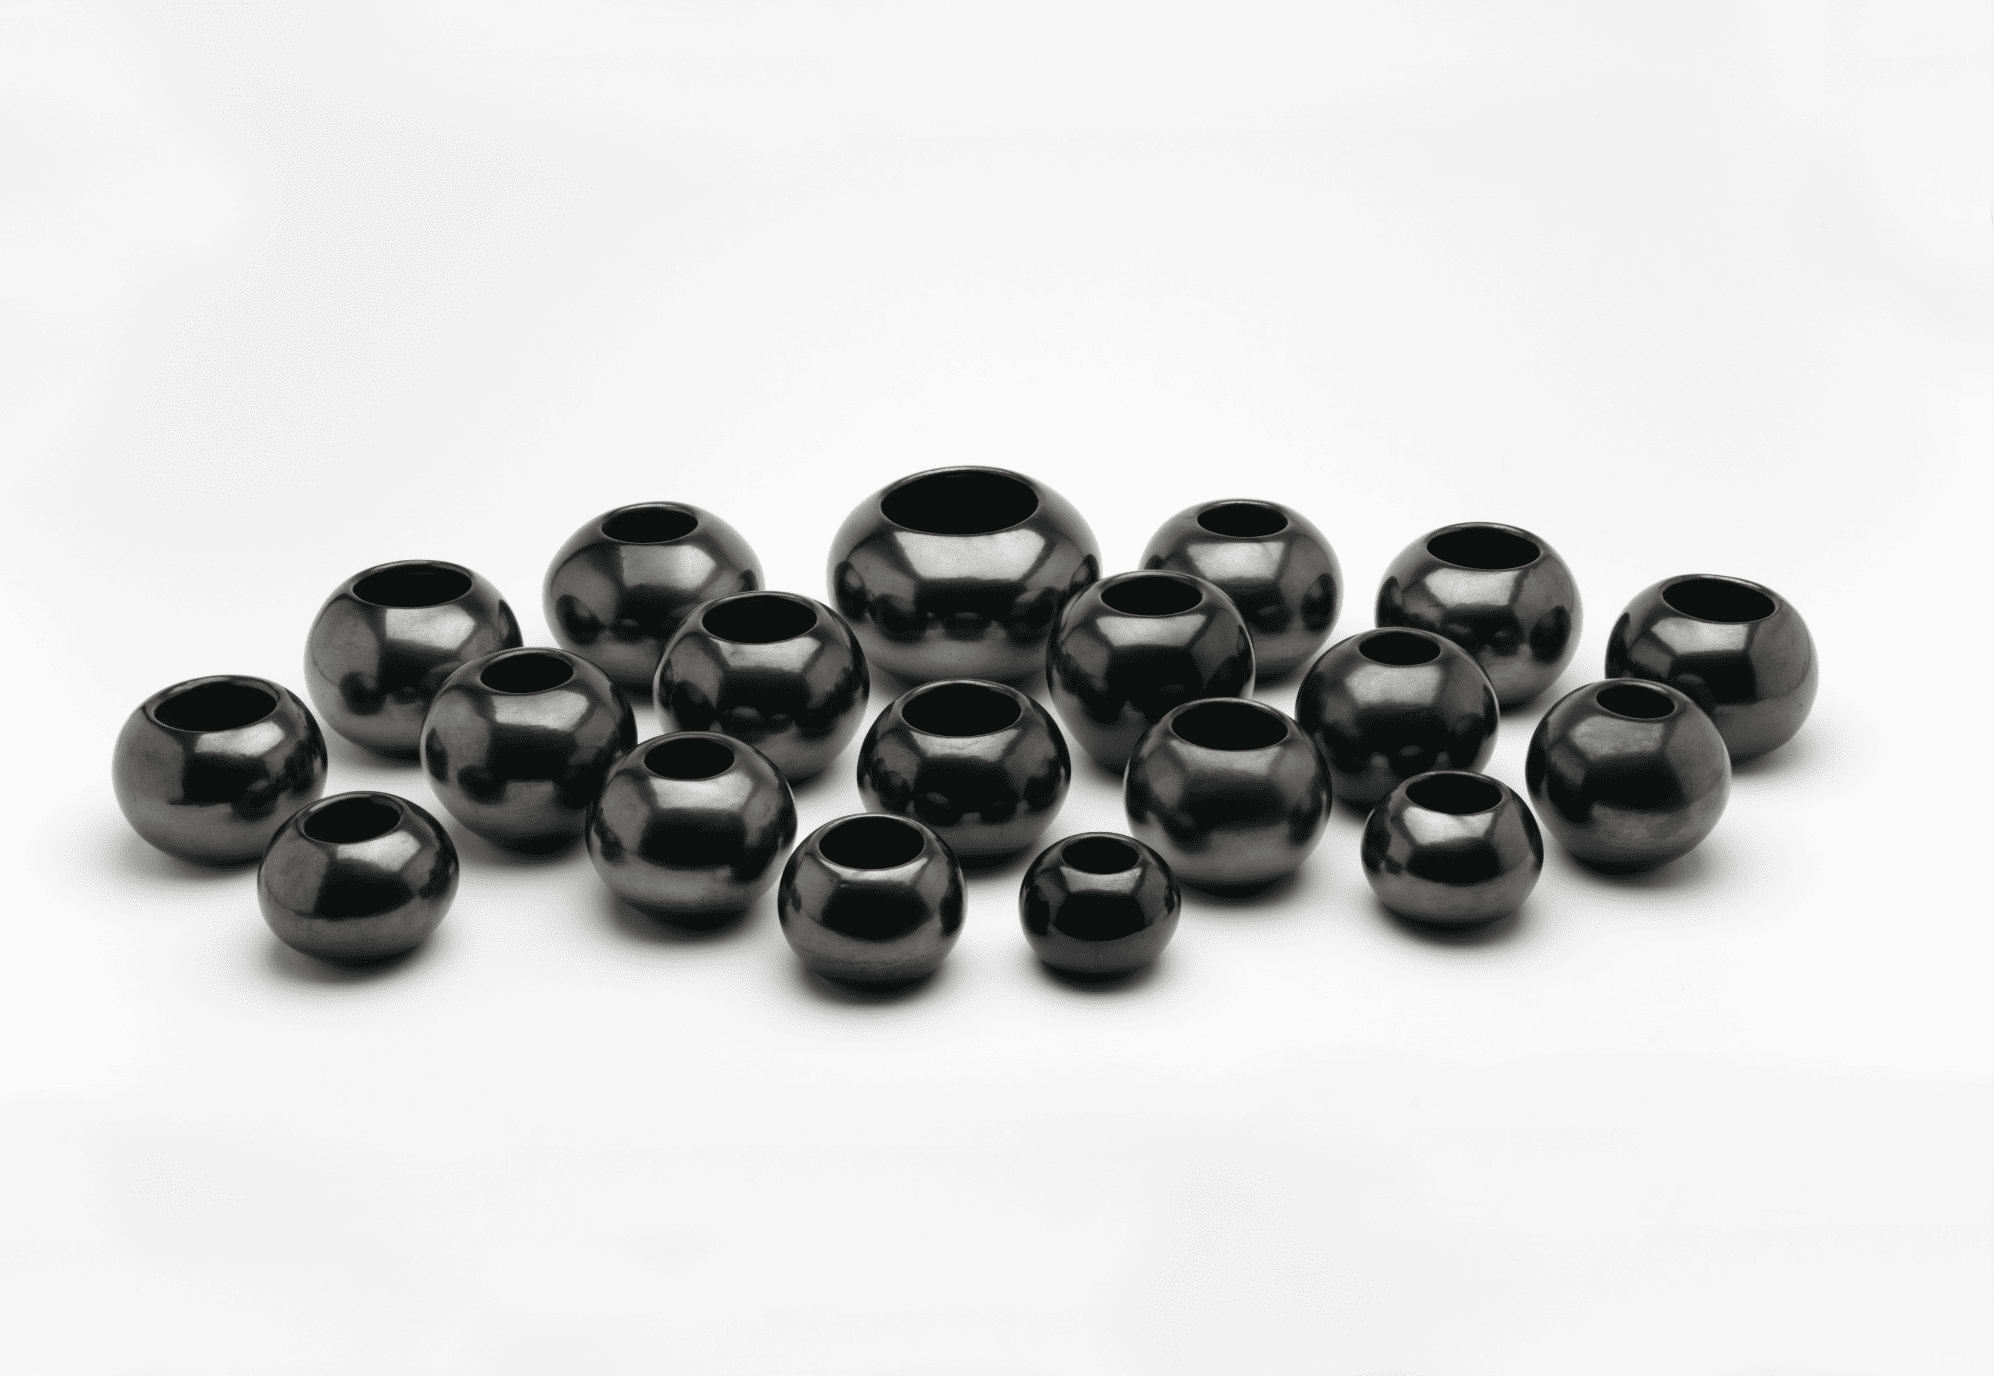 A group of black beads arranged on a white surface.